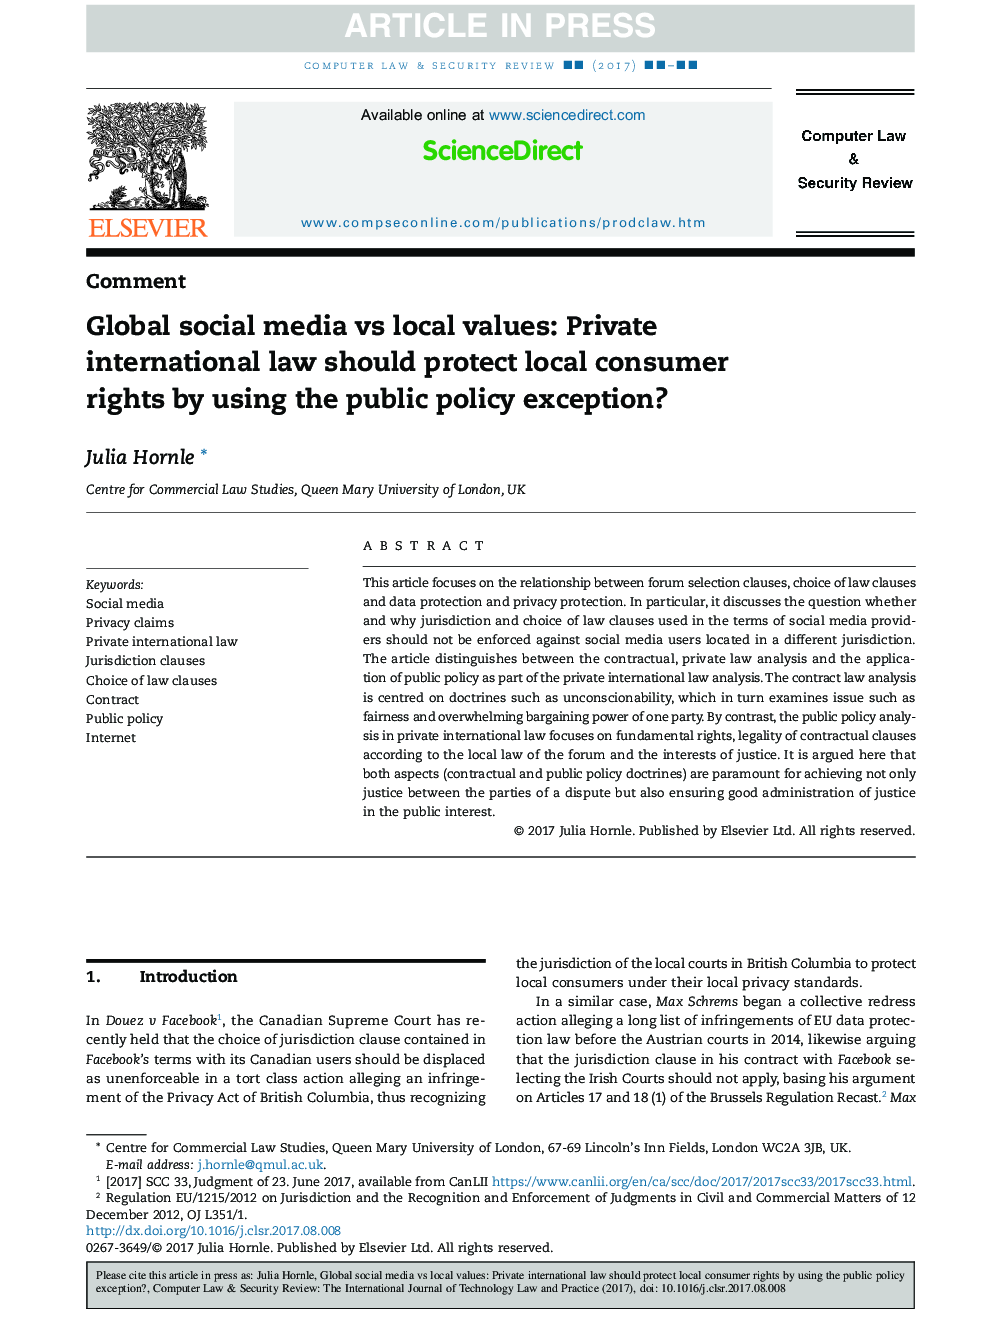 Global social media vs local values: Private international law should protect local consumer rights by using the public policy exception?